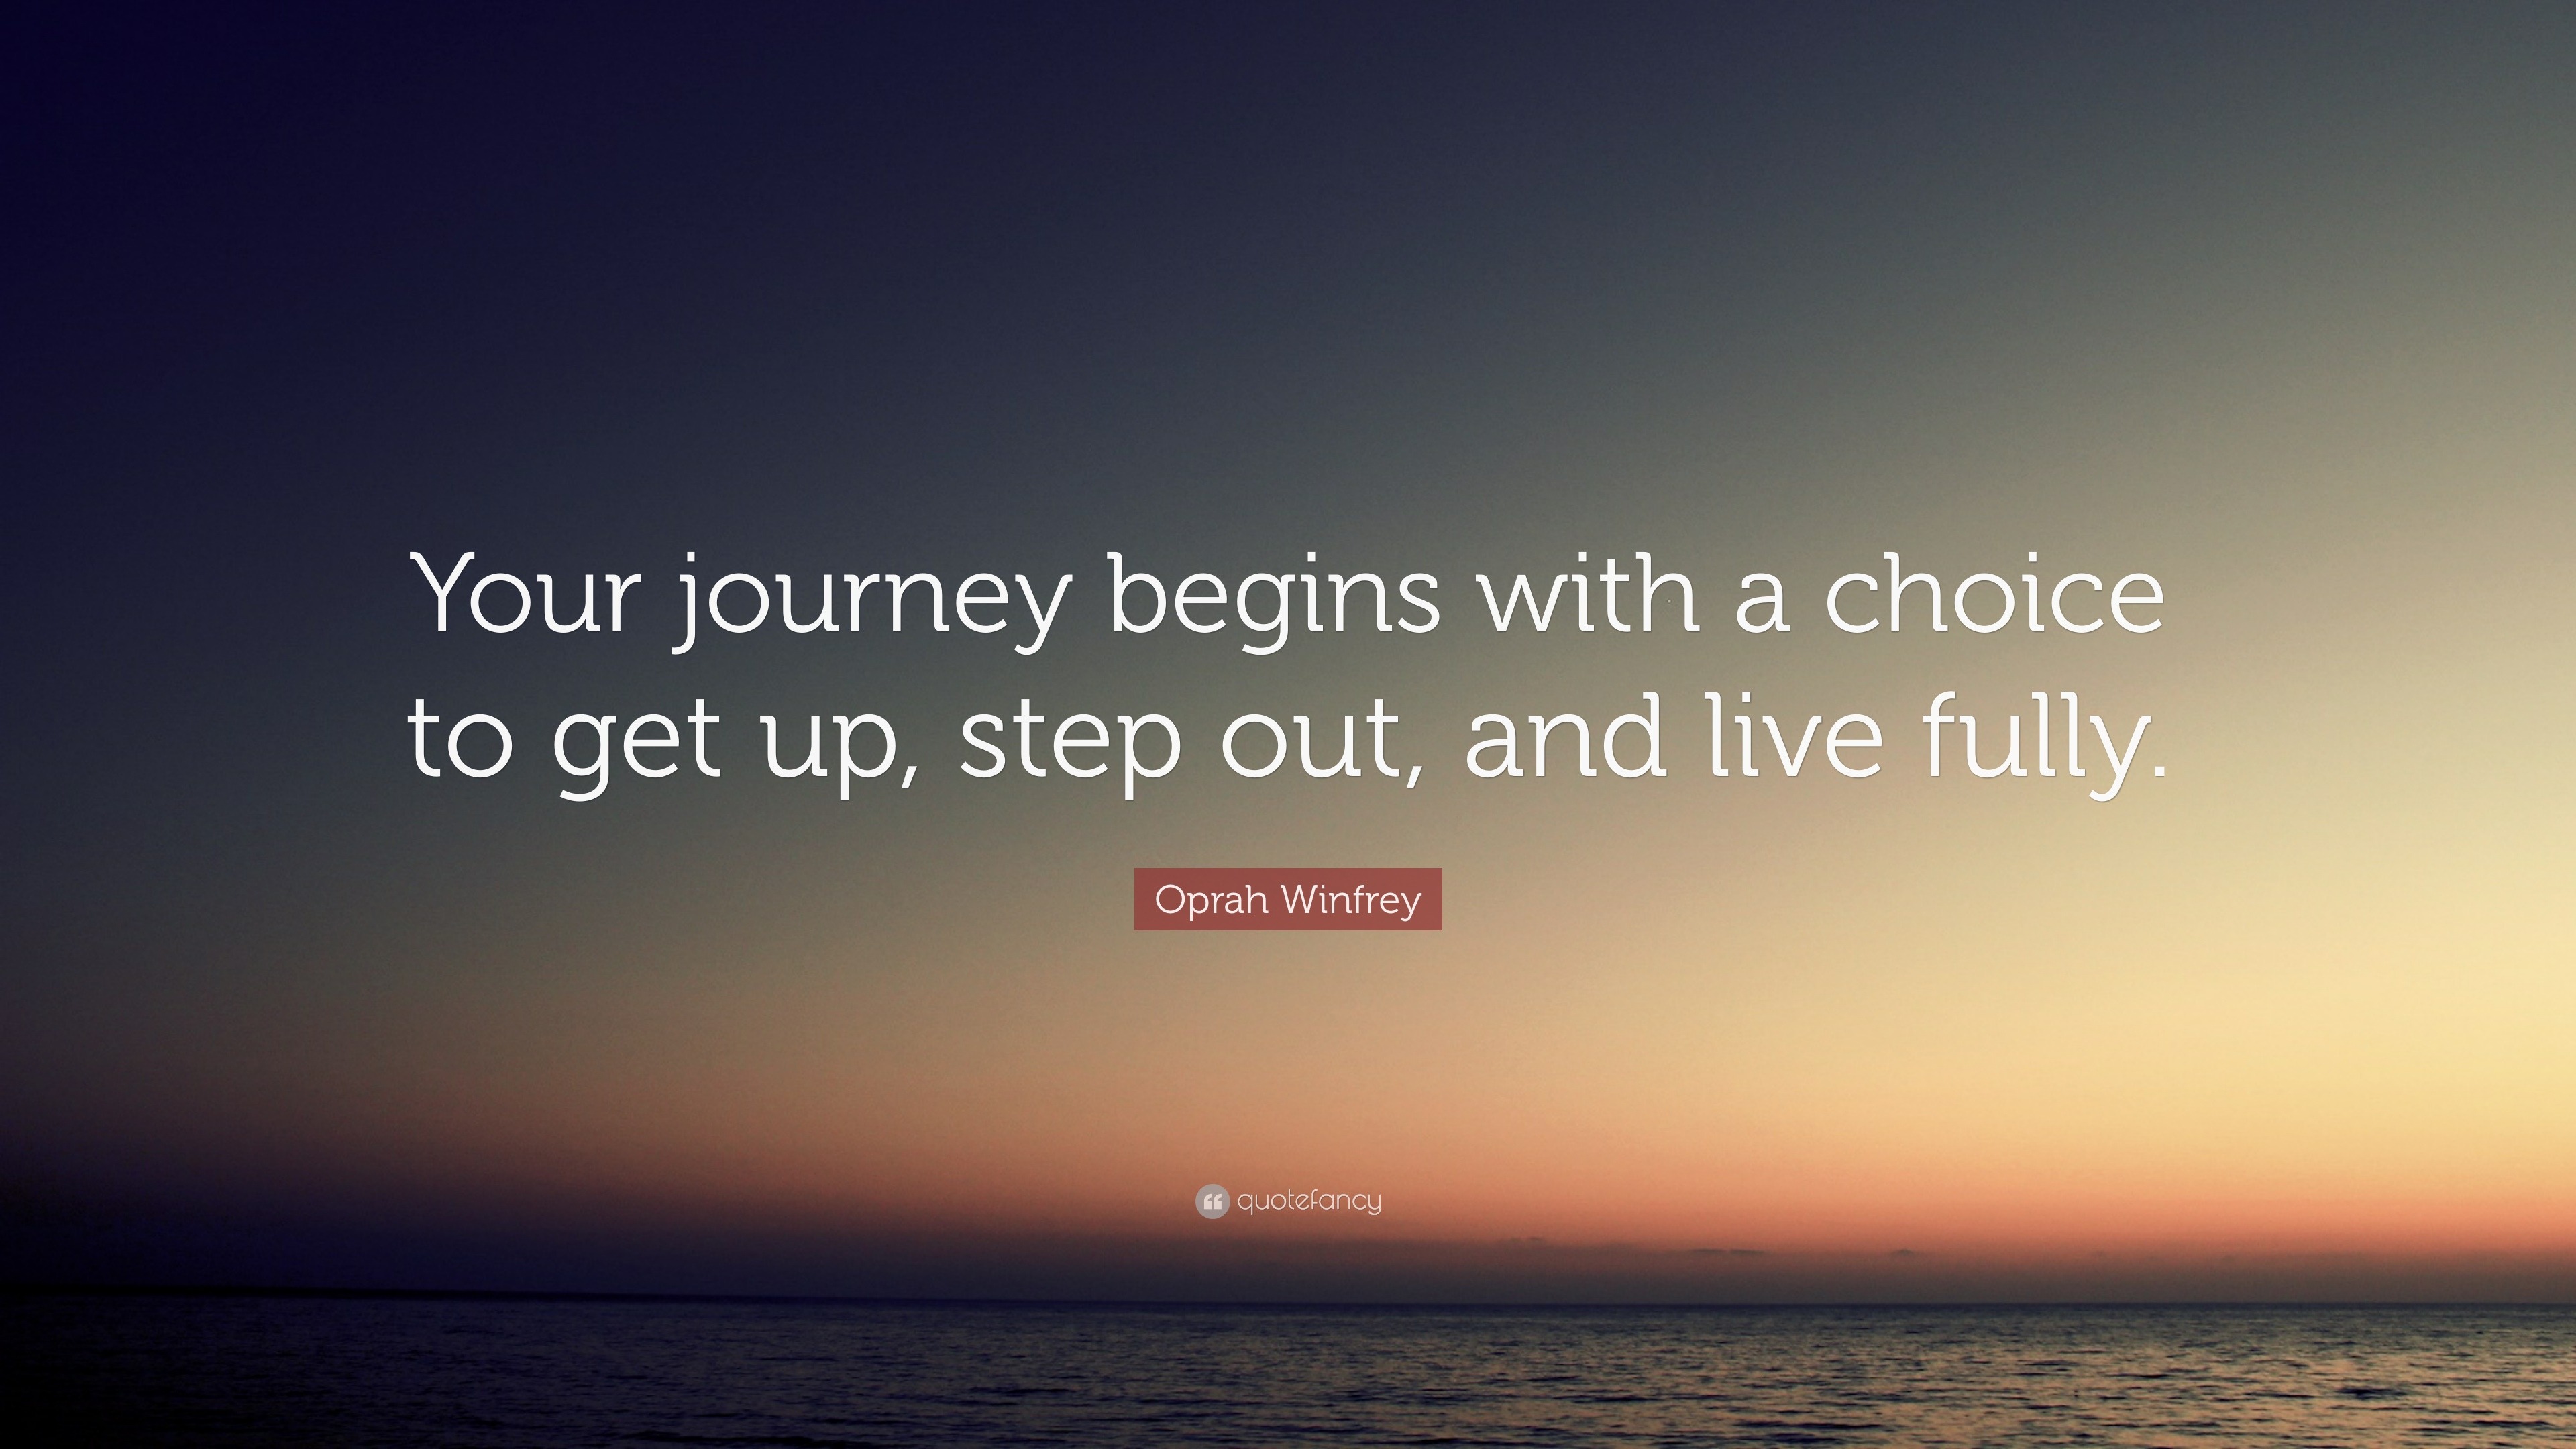 Oprah Winfrey Quote: “Your journey begins with a choice to get up, step ...